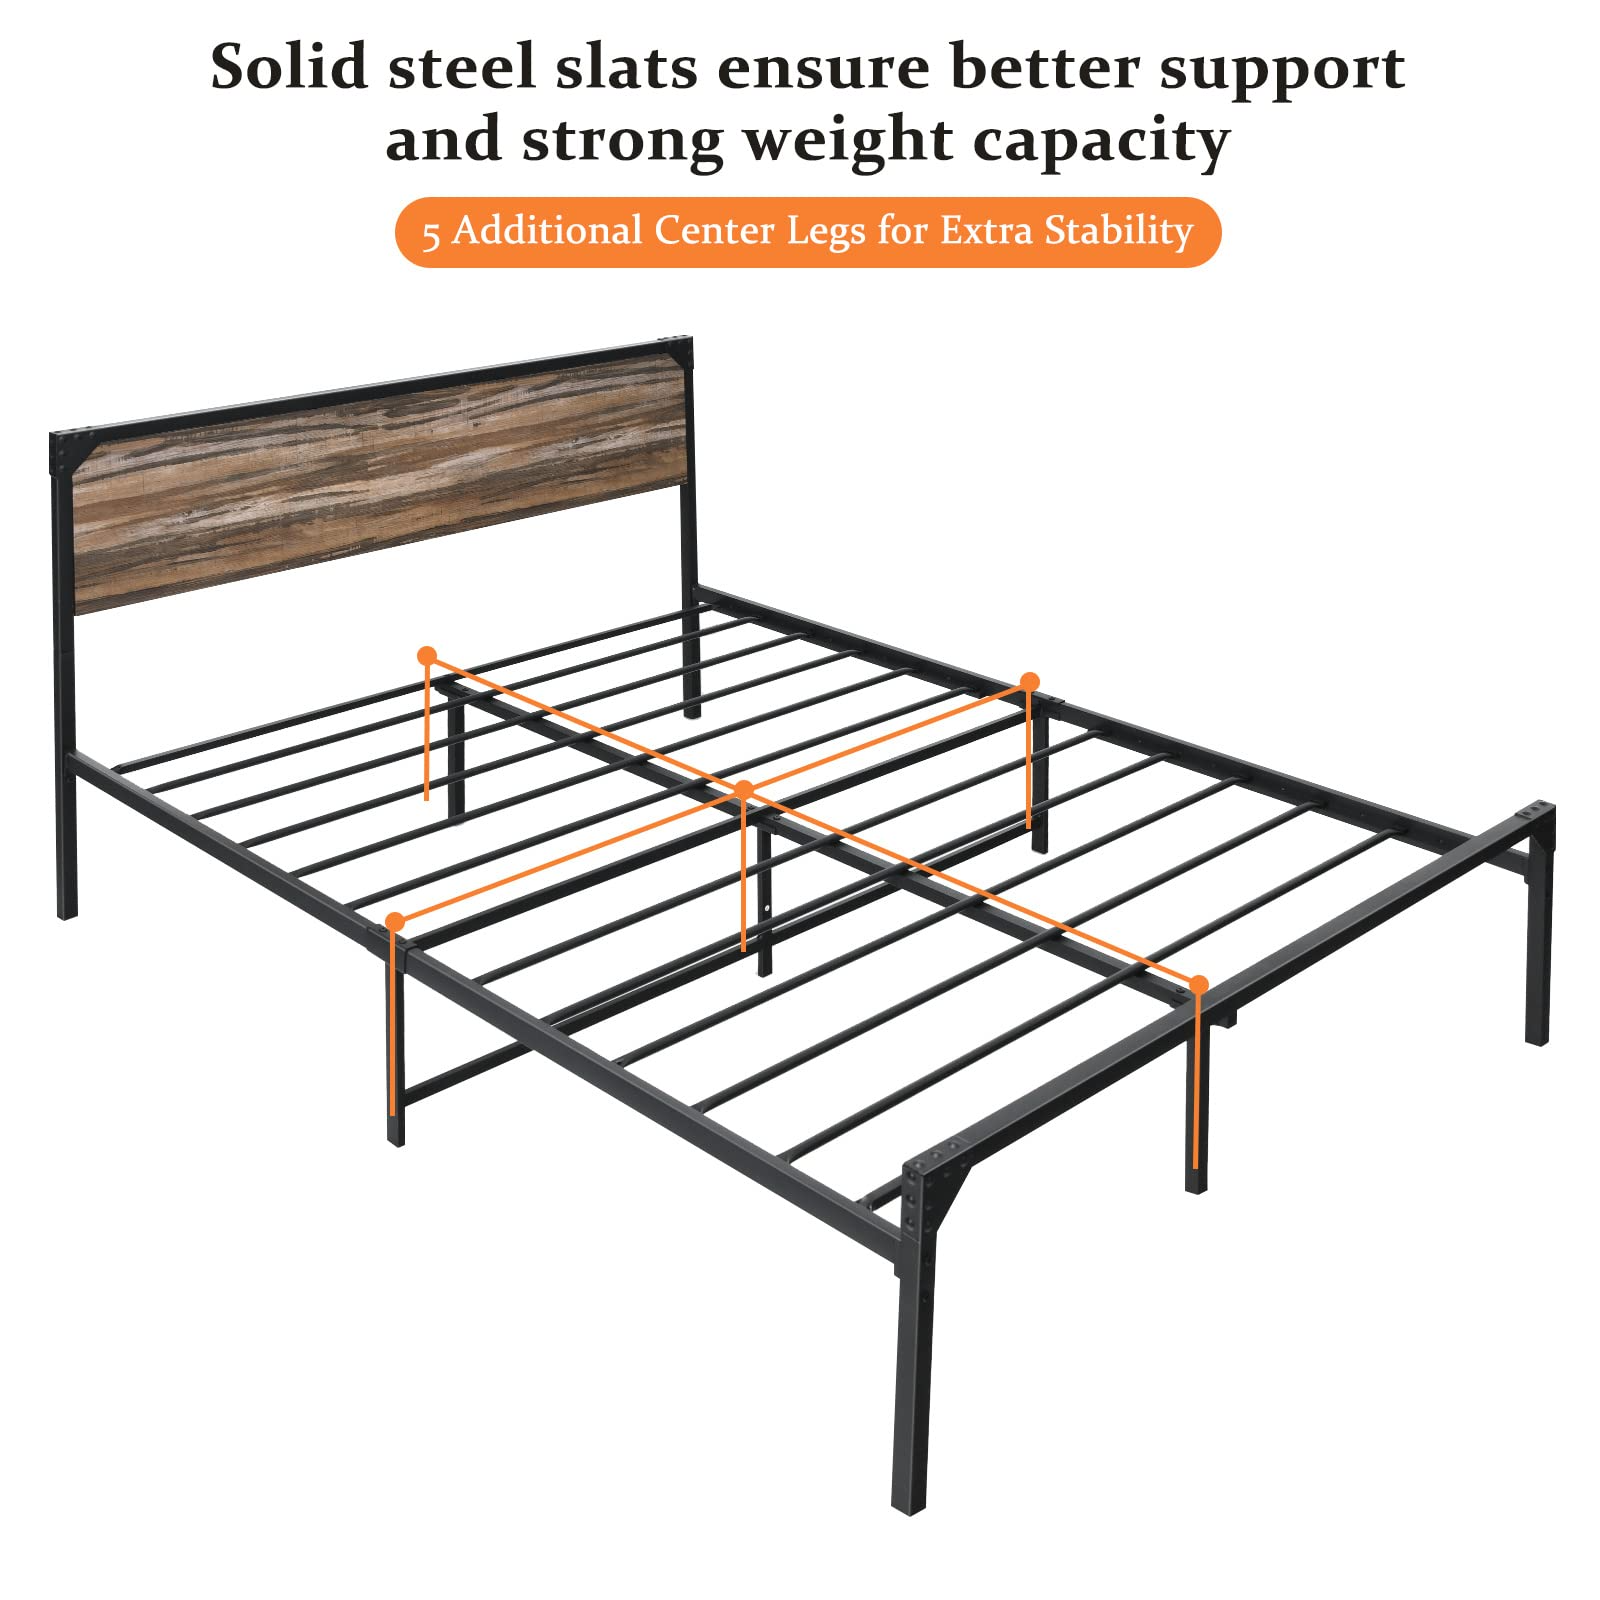 Metal Full / Queen Size Platform Bed Frame with Under Bed Space